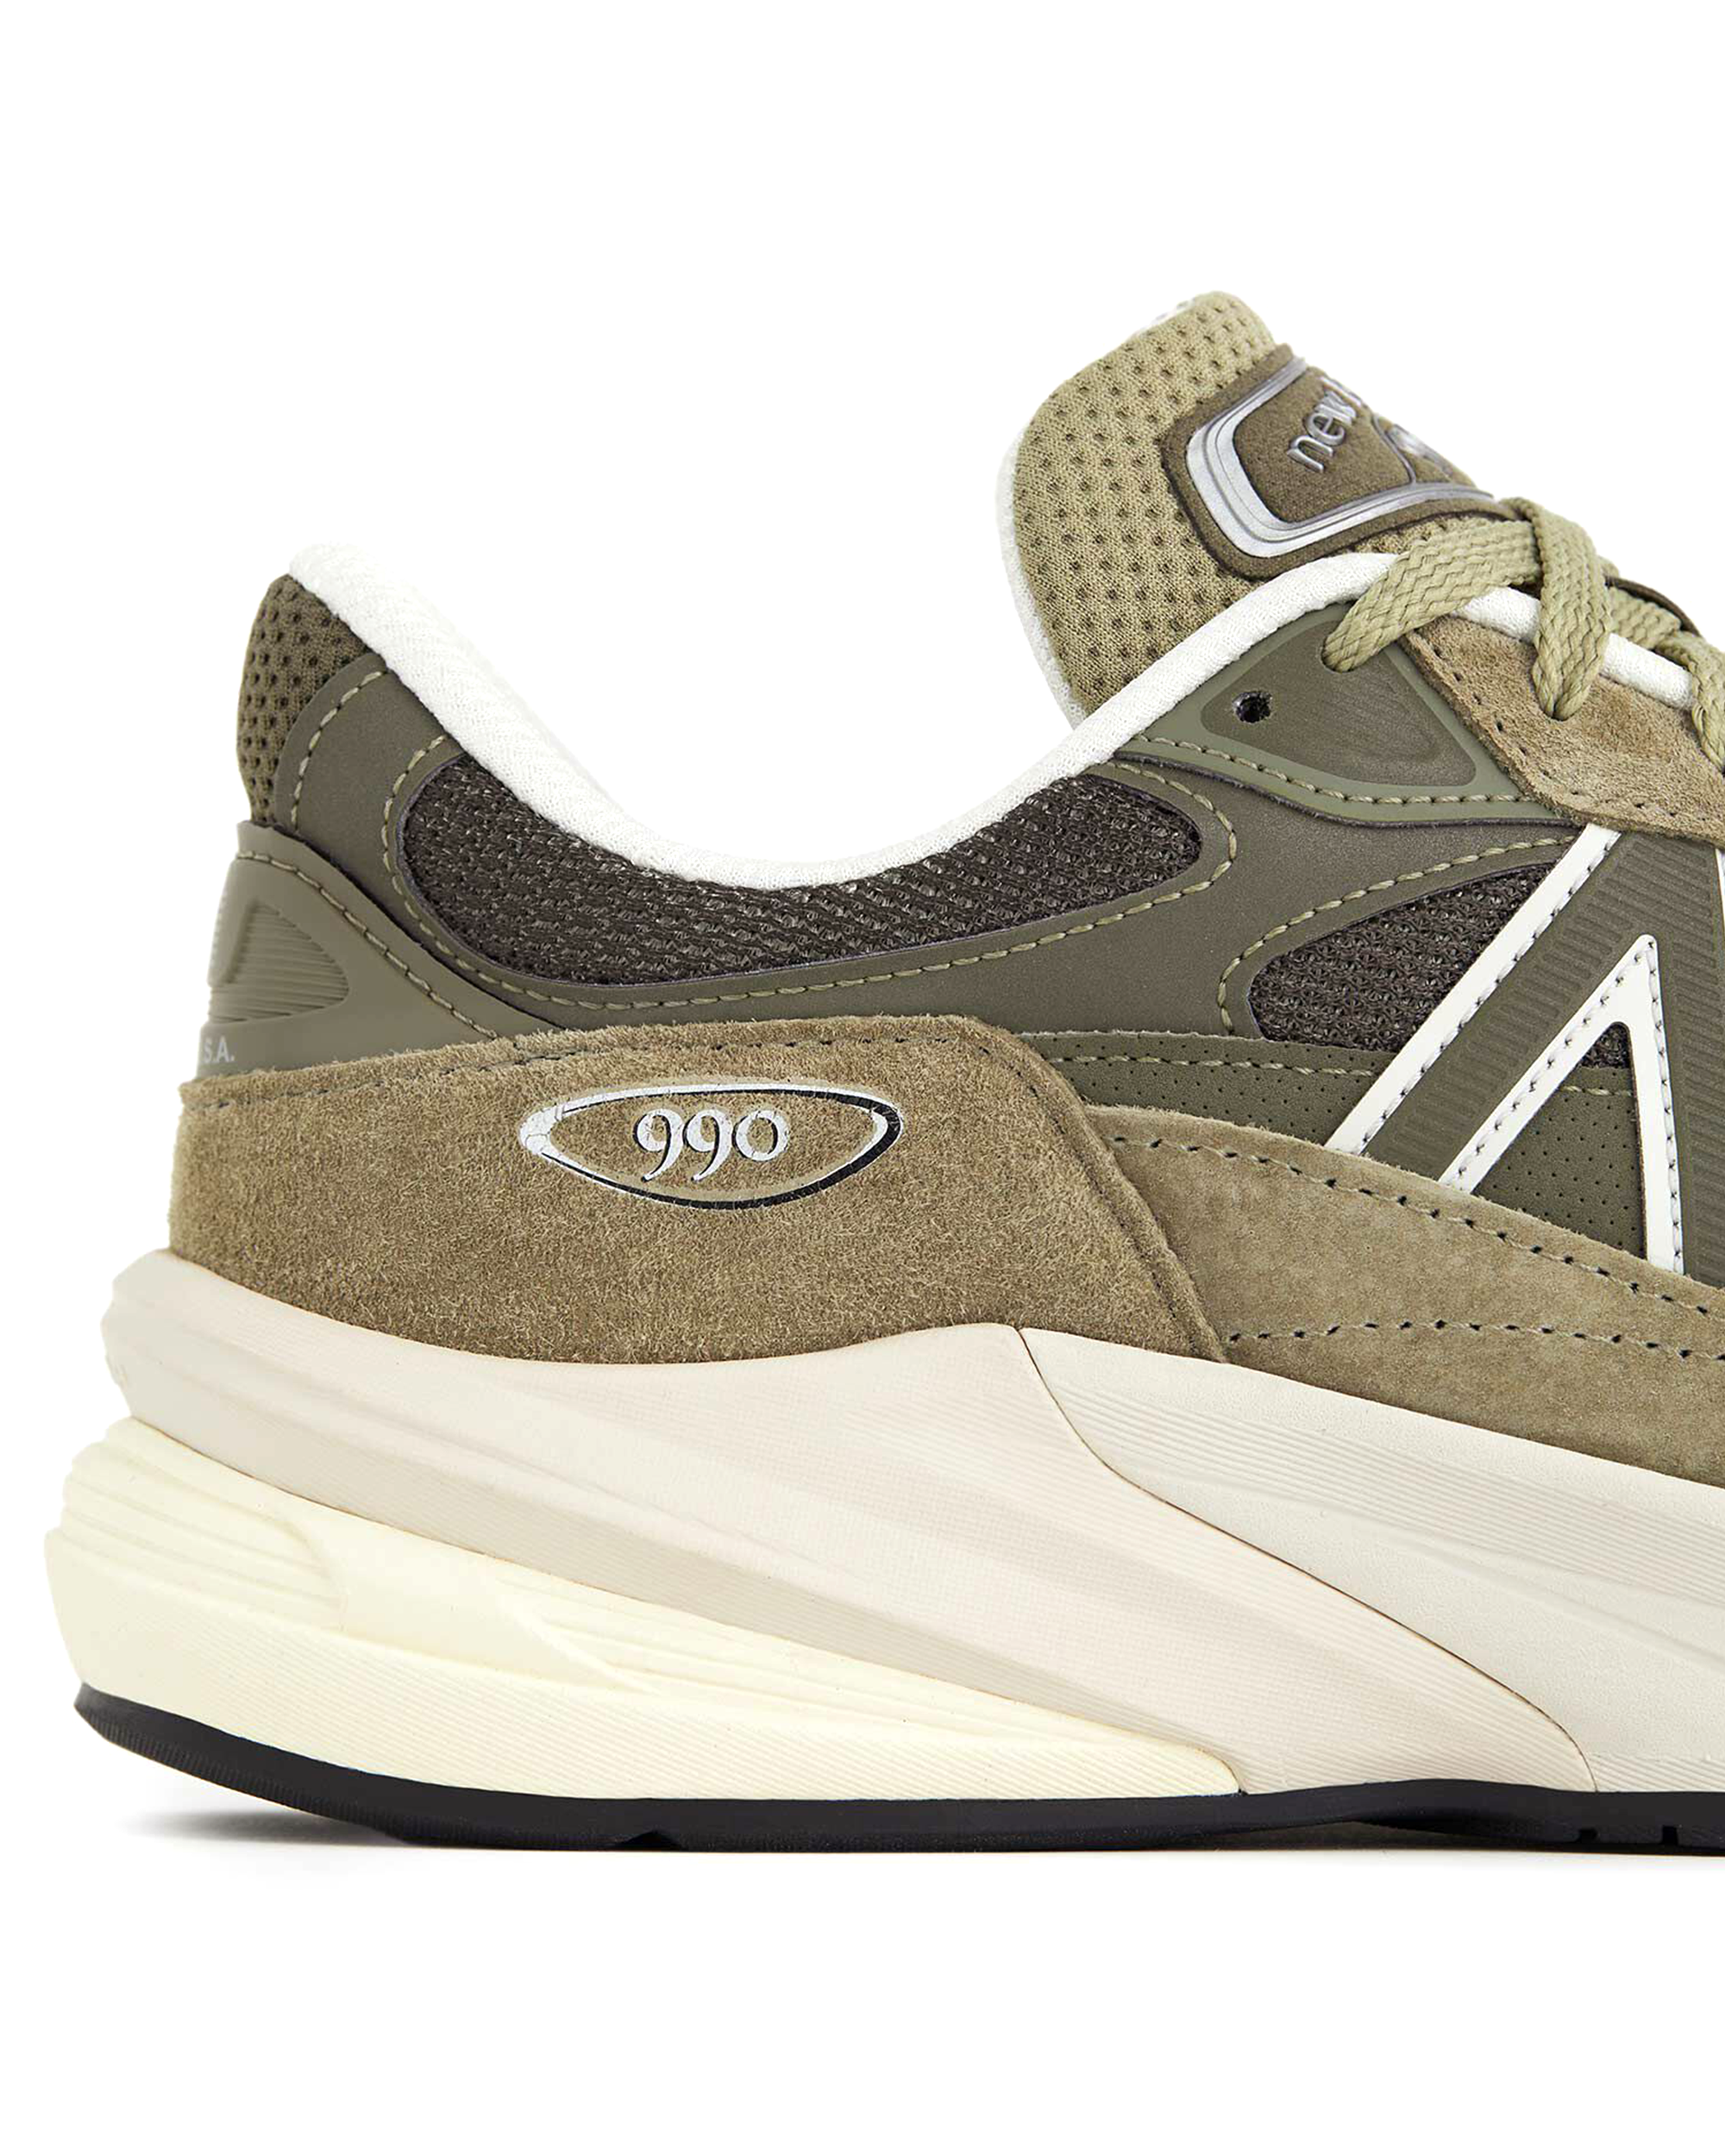 Made in USA 990v6 - True Camo / Muted Olive